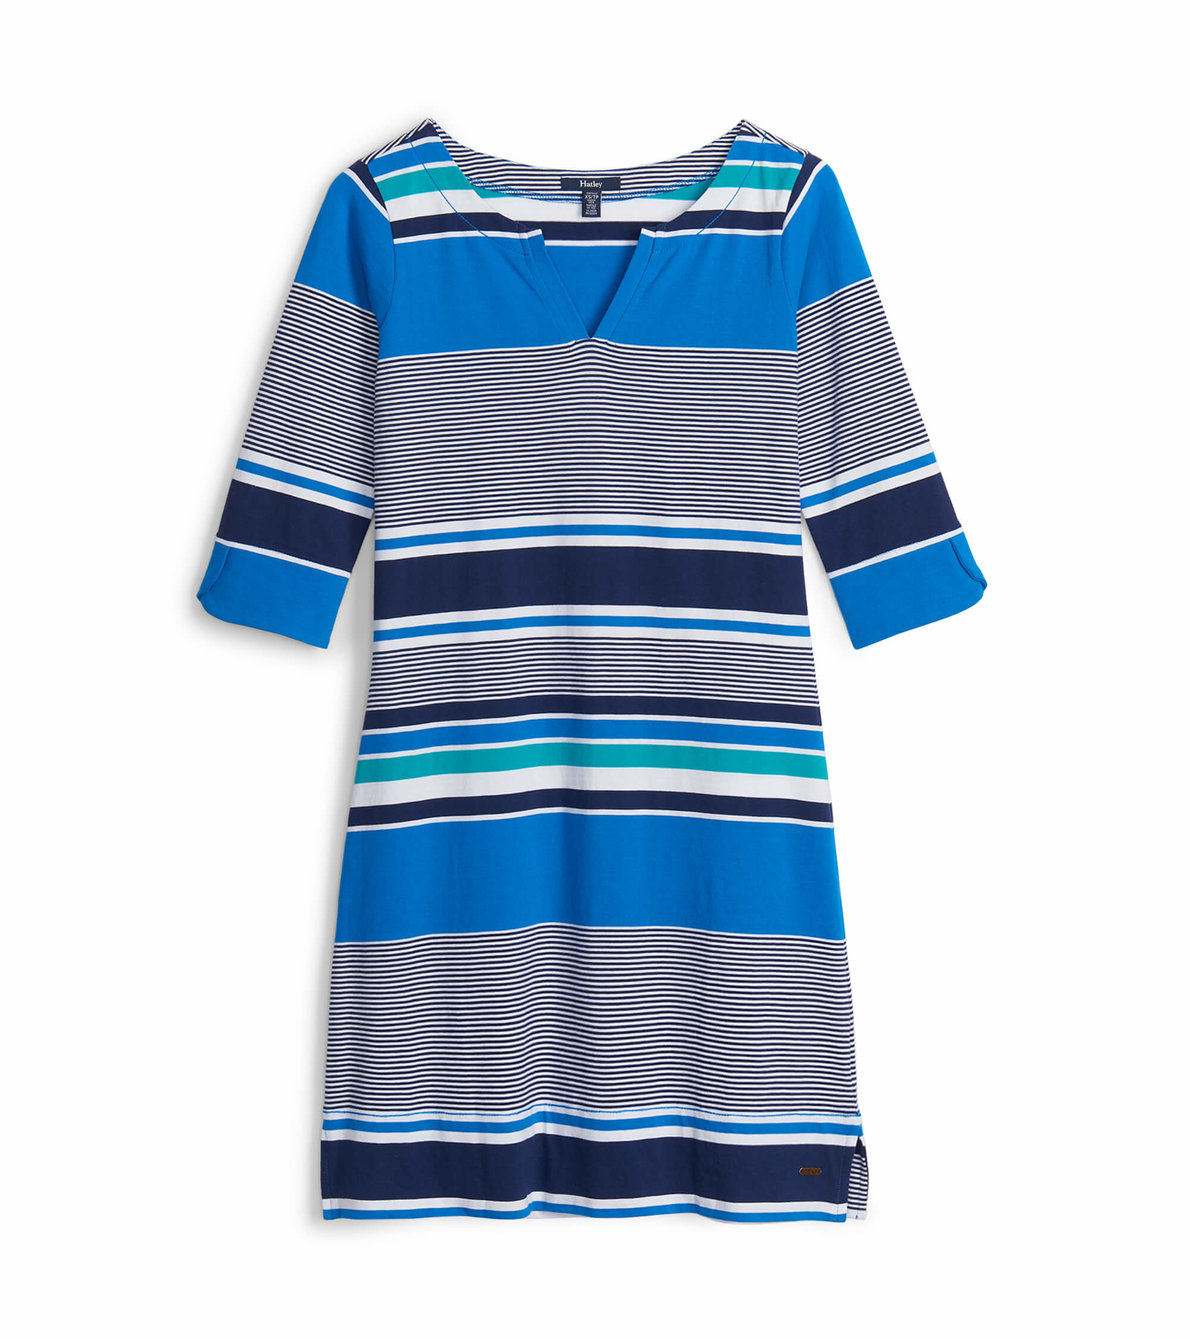 View larger image of Lucy Dress (Long) - Gardenside Stripes